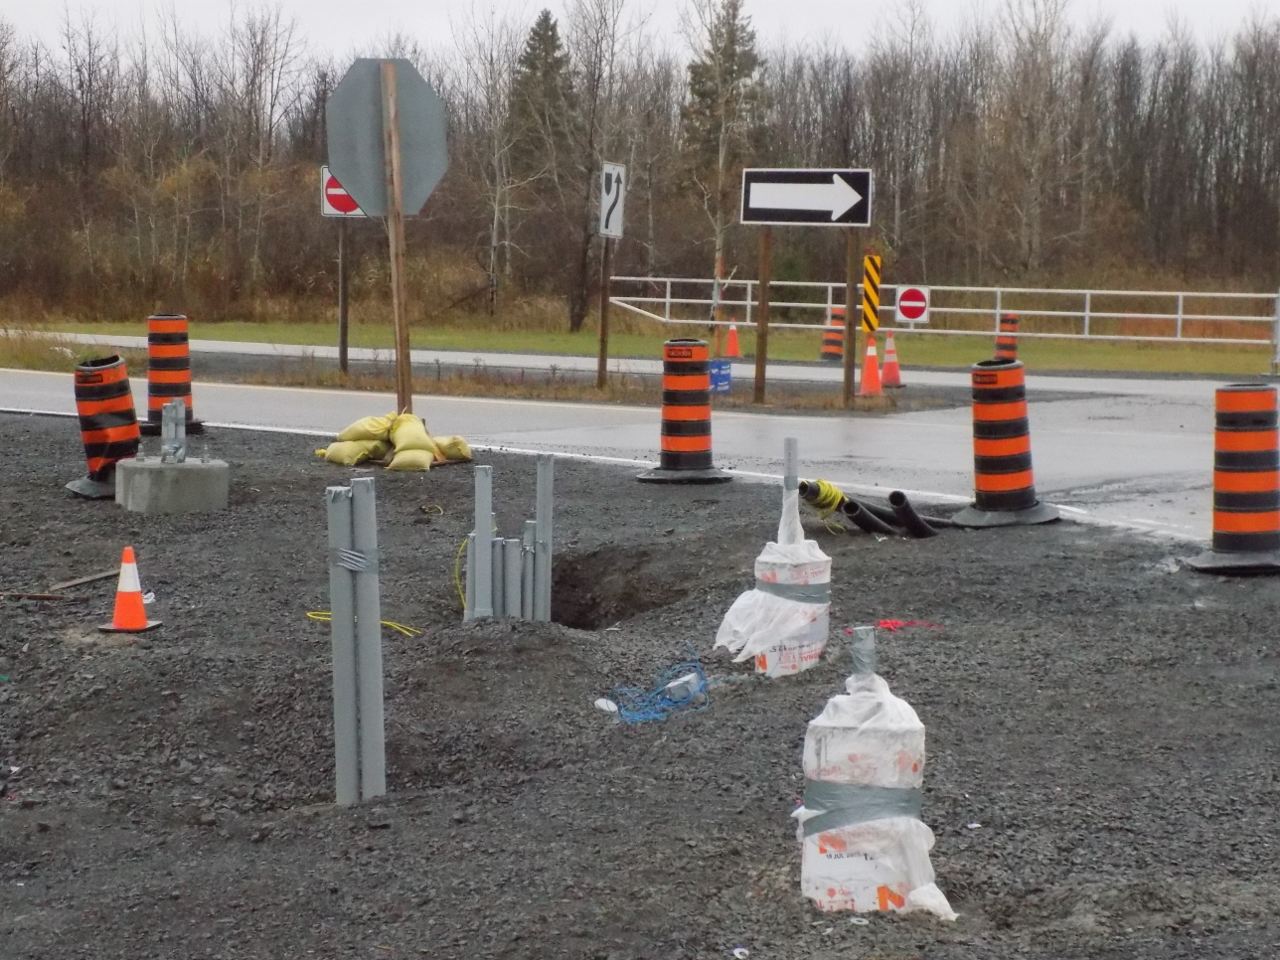 Traffic lights will be in by Christmas; culvert replacement postponed to fall of 2019